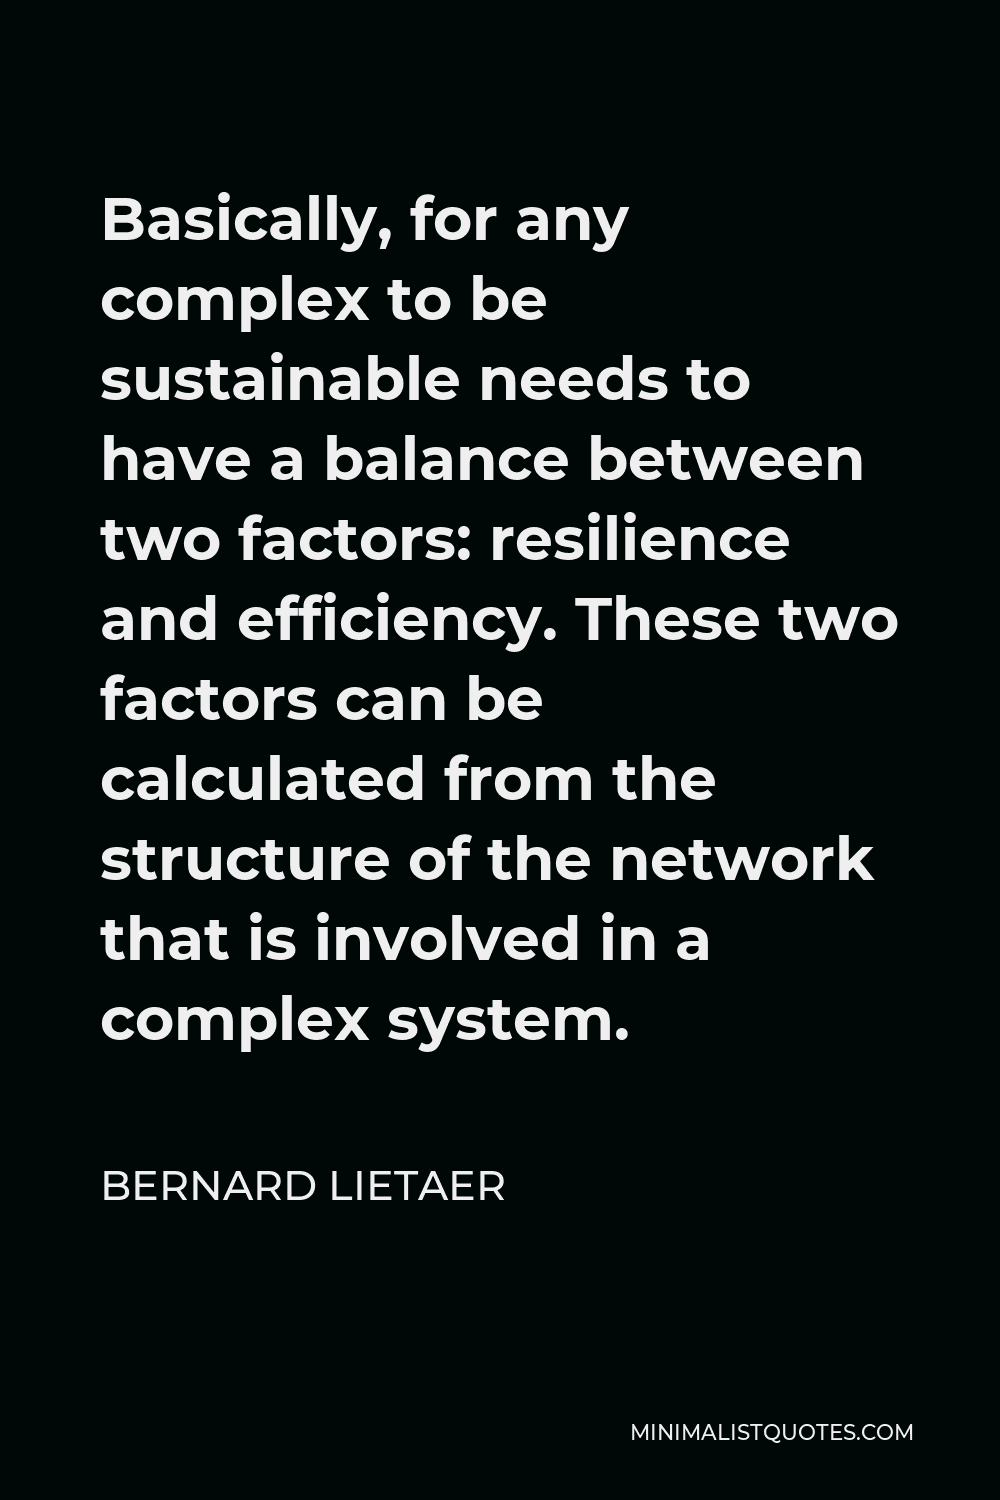 Bernard Lietaer Quote - Basically, for any complex to be sustainable needs to have a balance between two factors: resilience and efficiency. These two factors can be calculated from the structure of the network that is involved in a complex system.